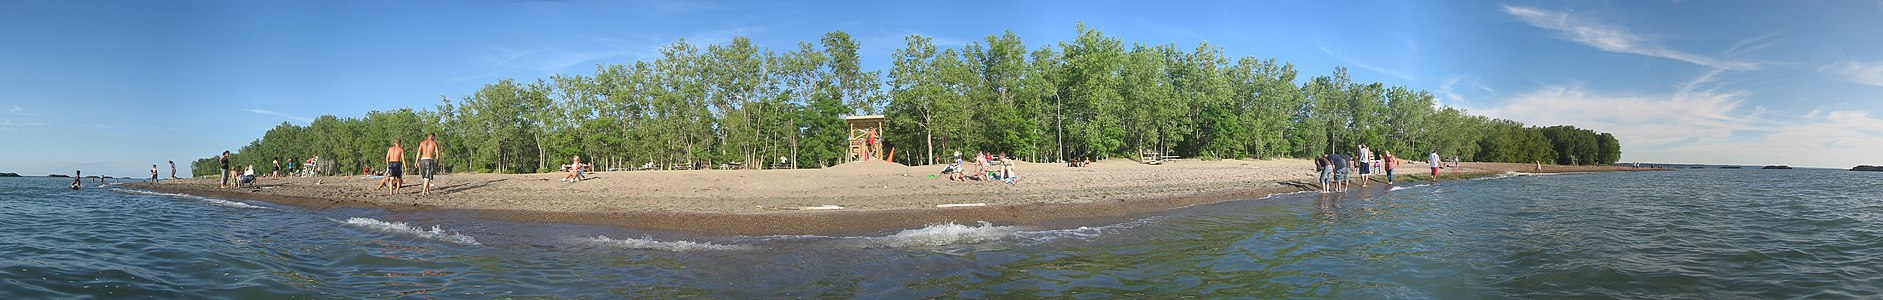 A view of a sunlit beach, that is flanked by green trees, from the water under a mostly clear, blue sky with several vacationers.